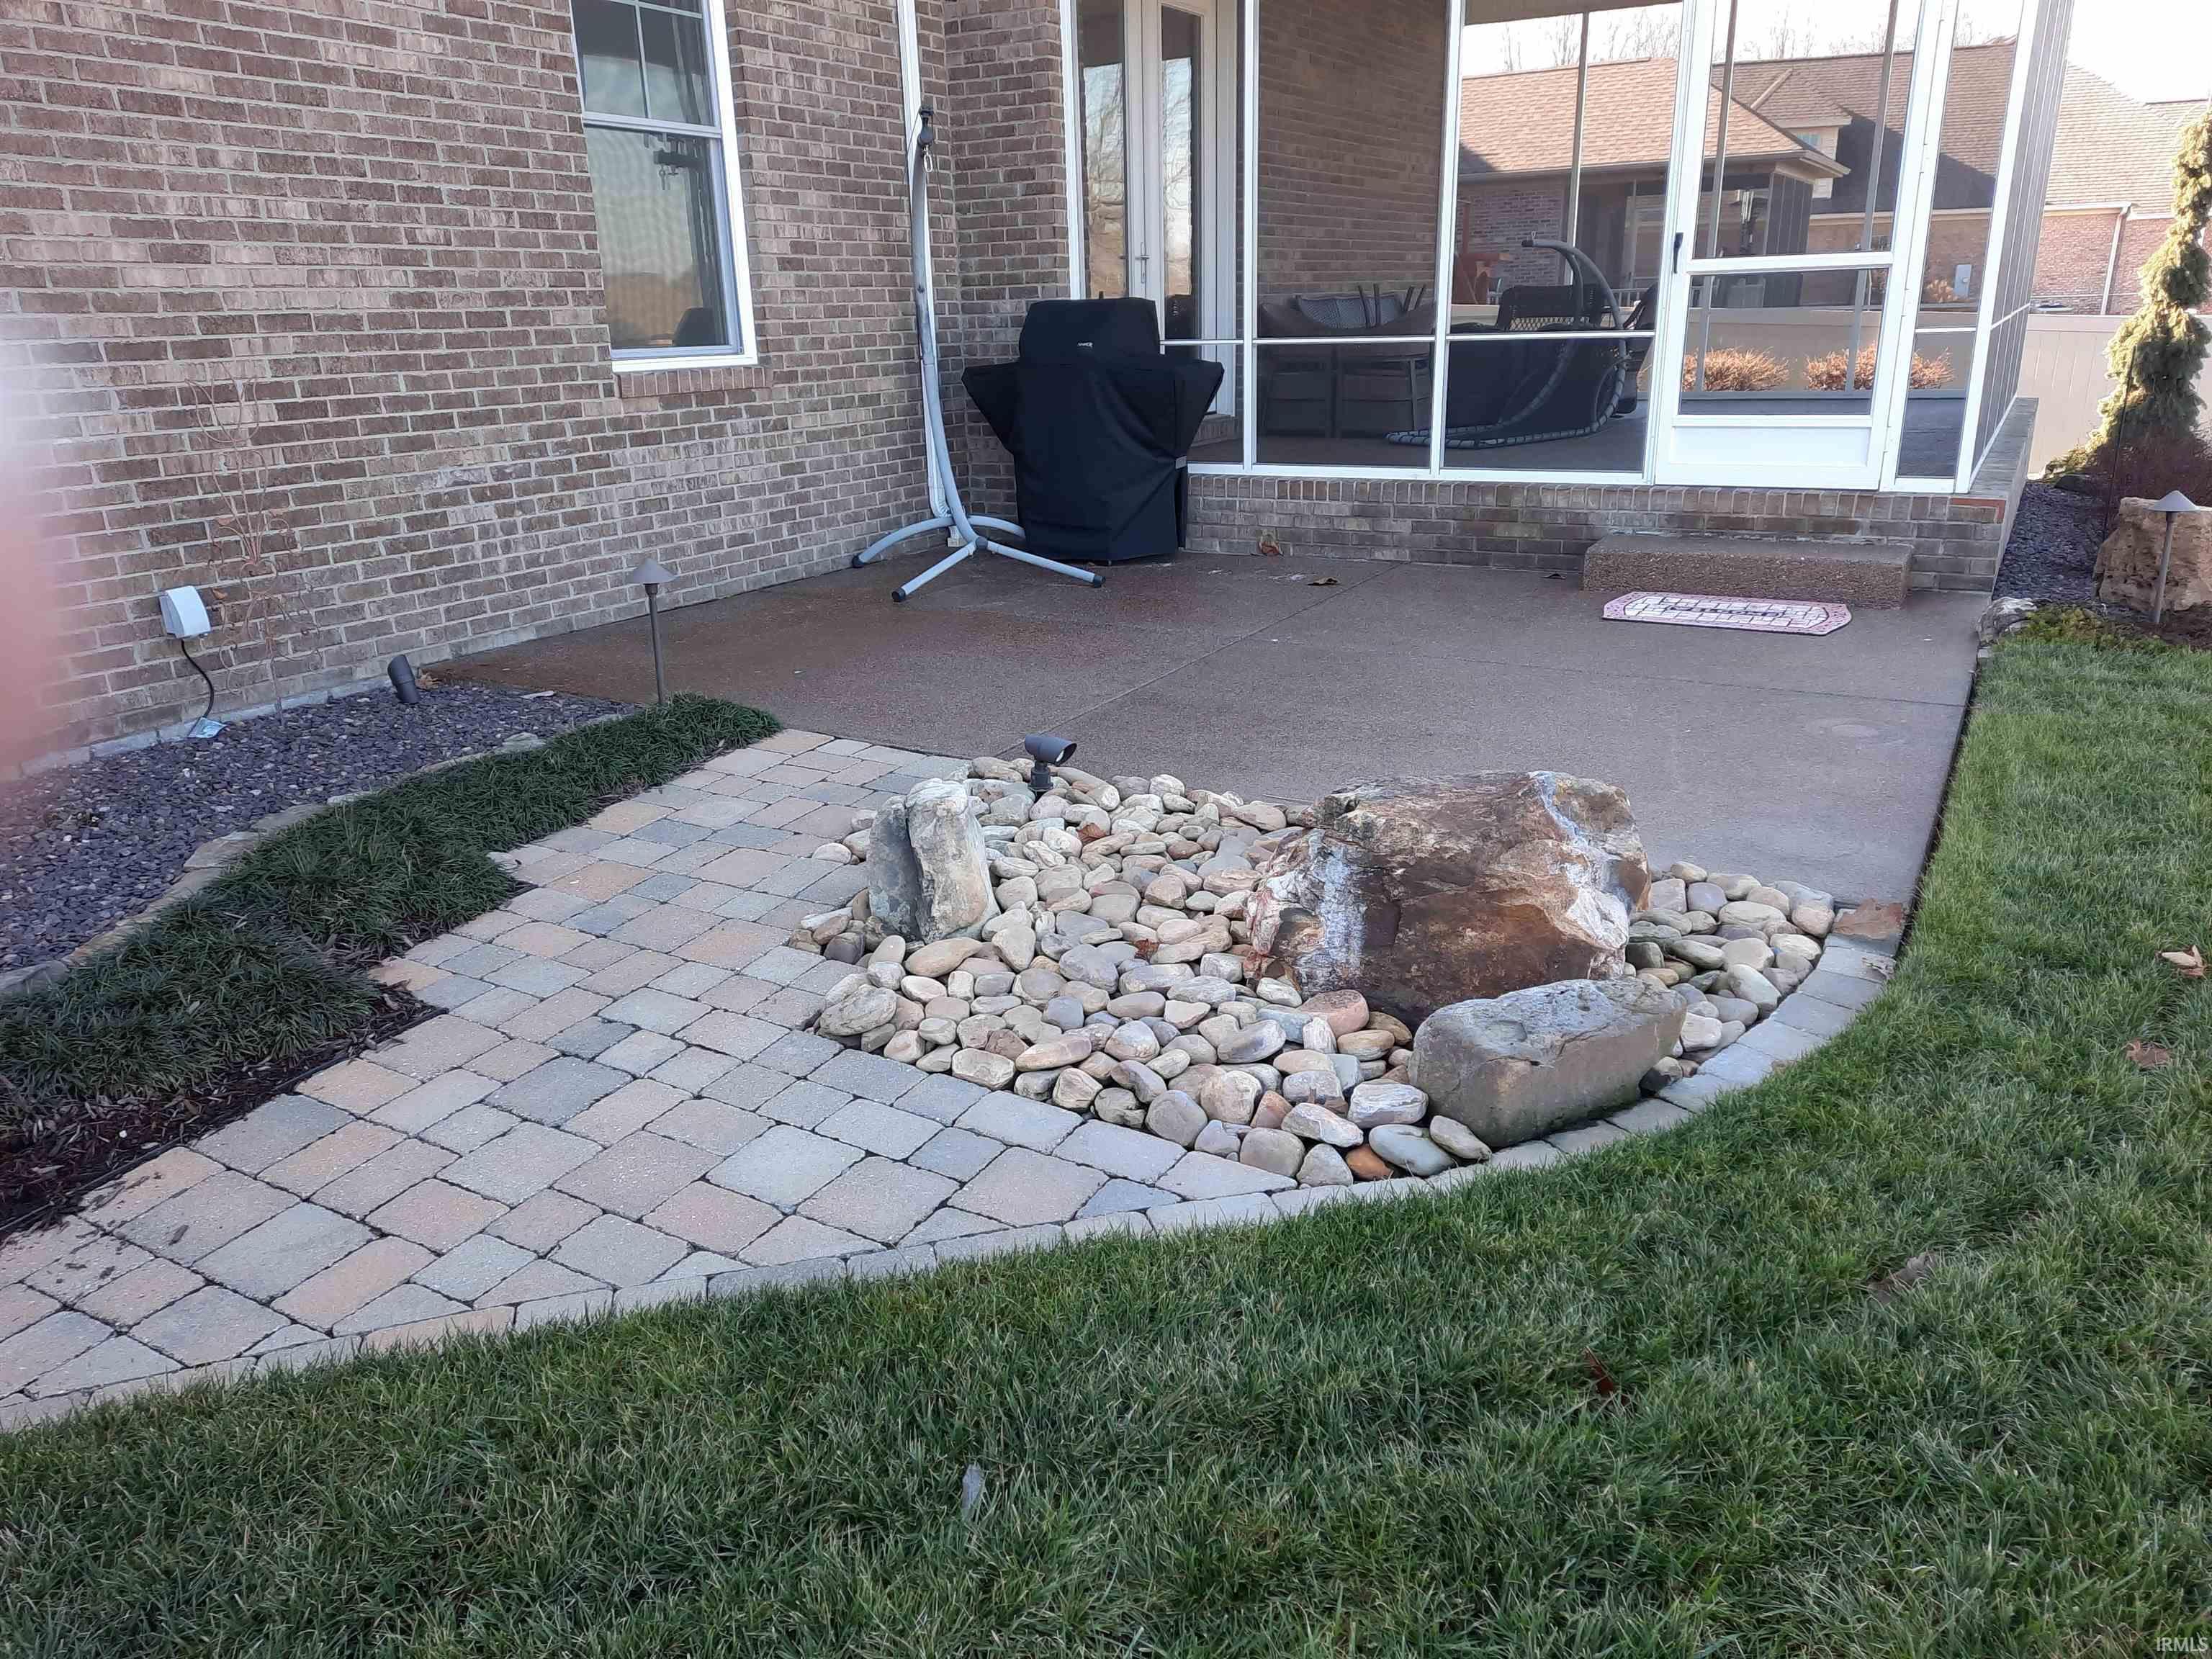 A great area for grilling w/a bubbling rock providing a wonderful oasis....